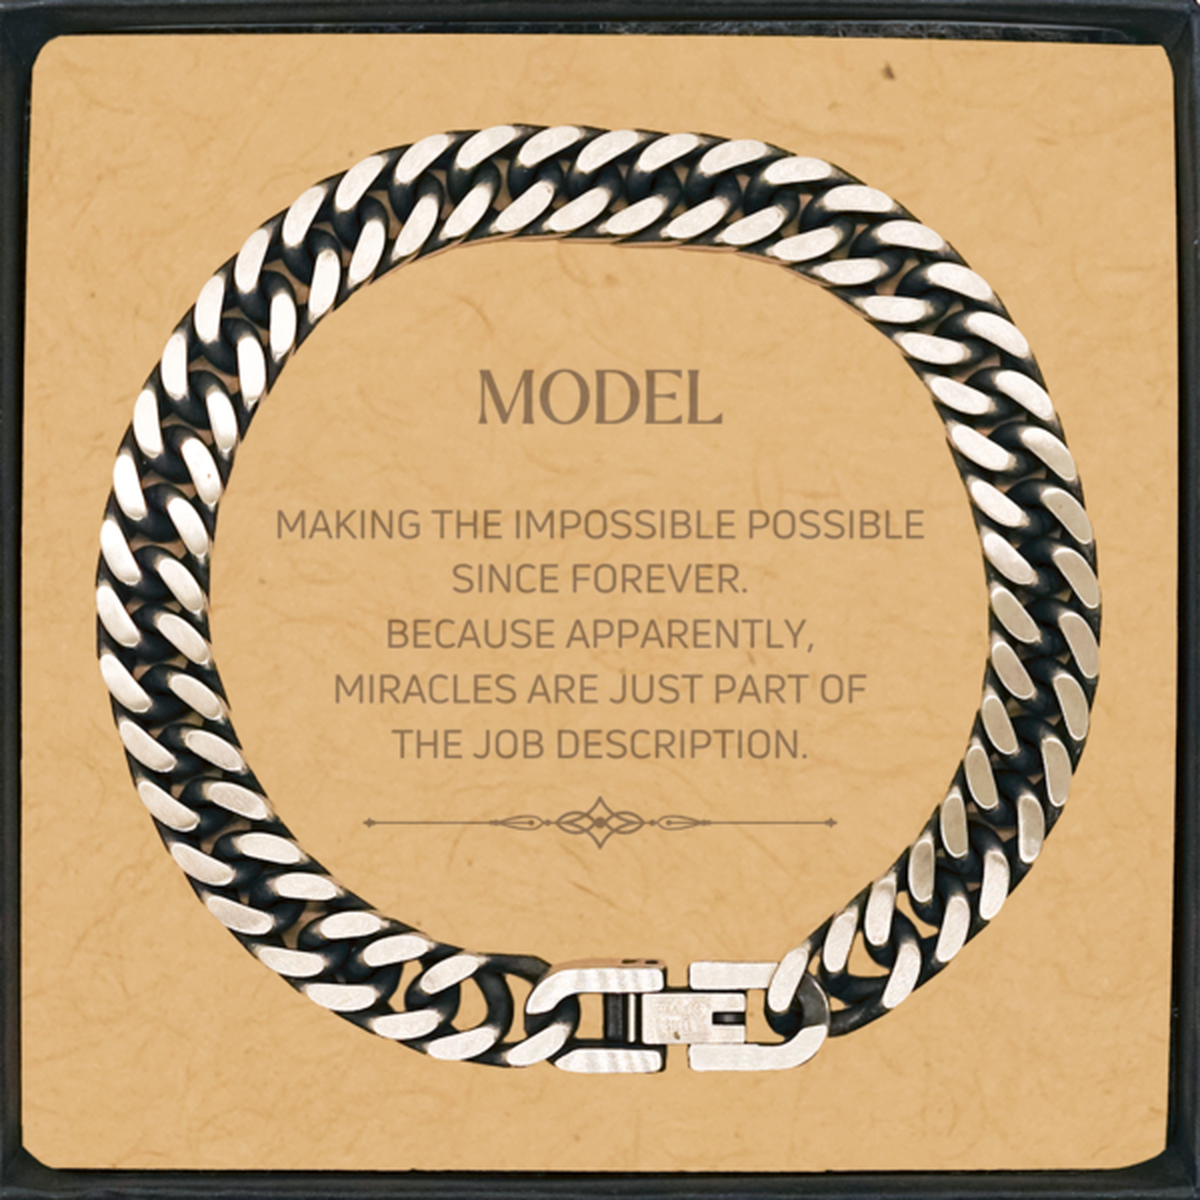 Funny Model Gifts, Miracles are just part of the job description, Inspirational Birthday Cuban Link Chain Bracelet For Model, Men, Women, Coworkers, Friends, Boss